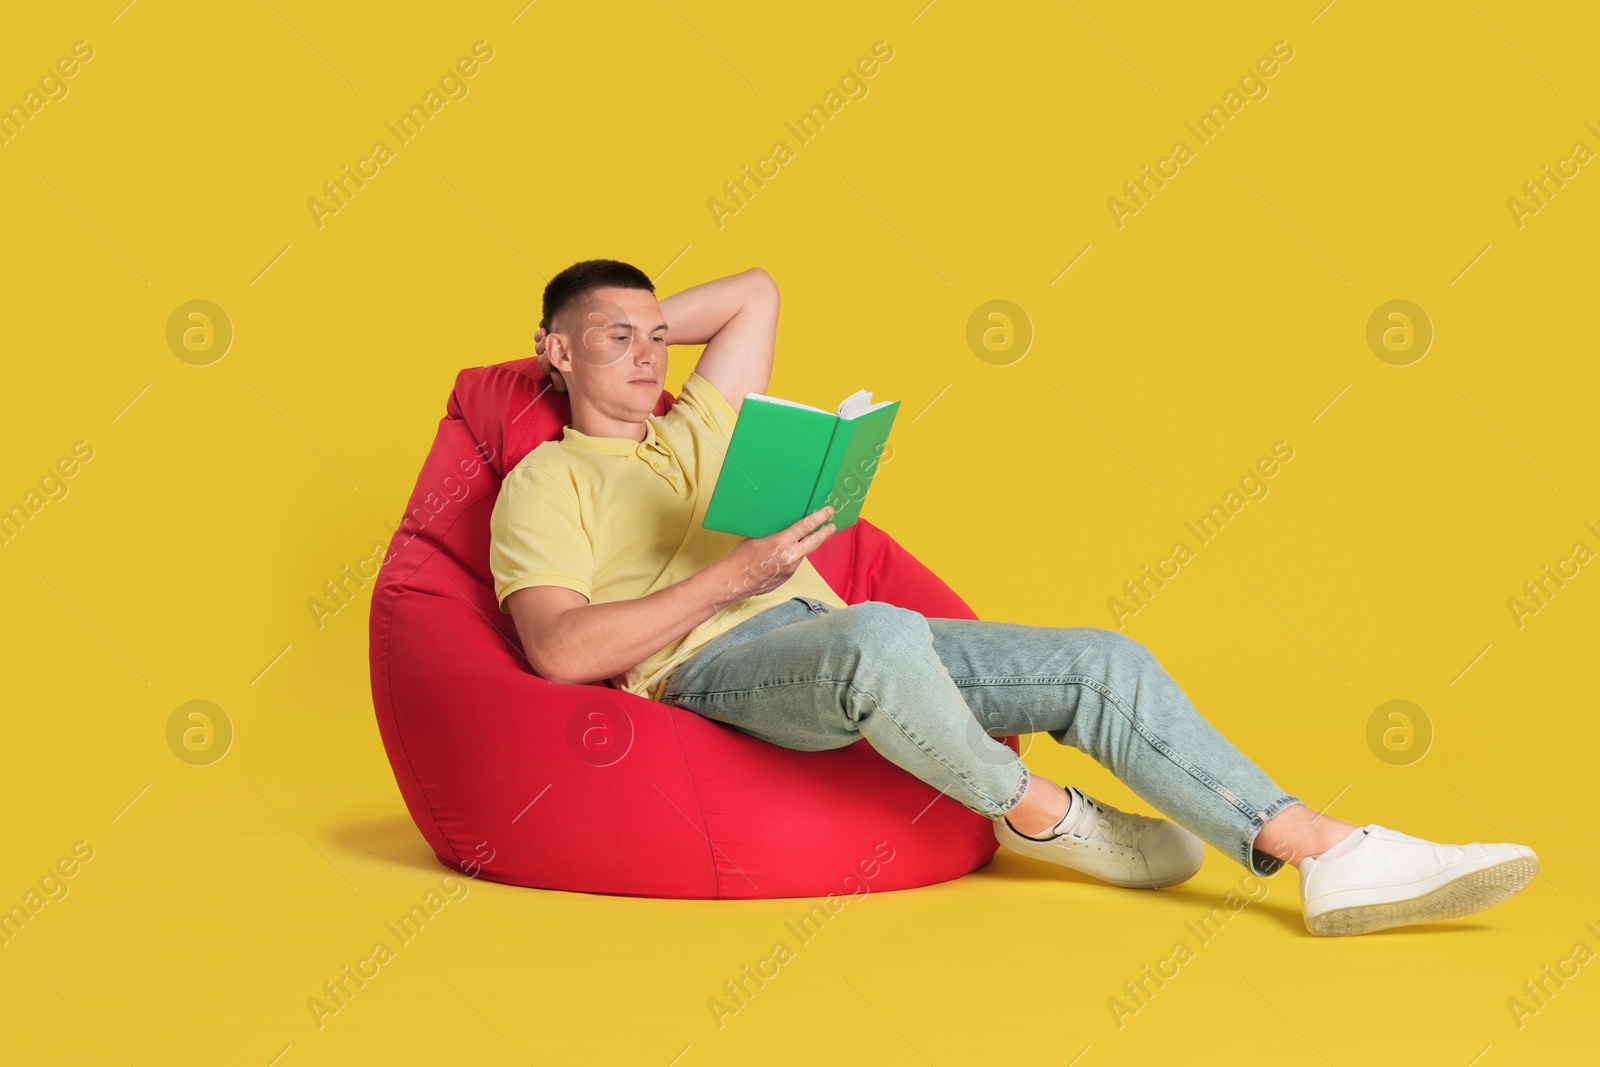 Photo of Handsome man reading book on red bean bag chair against yellow background